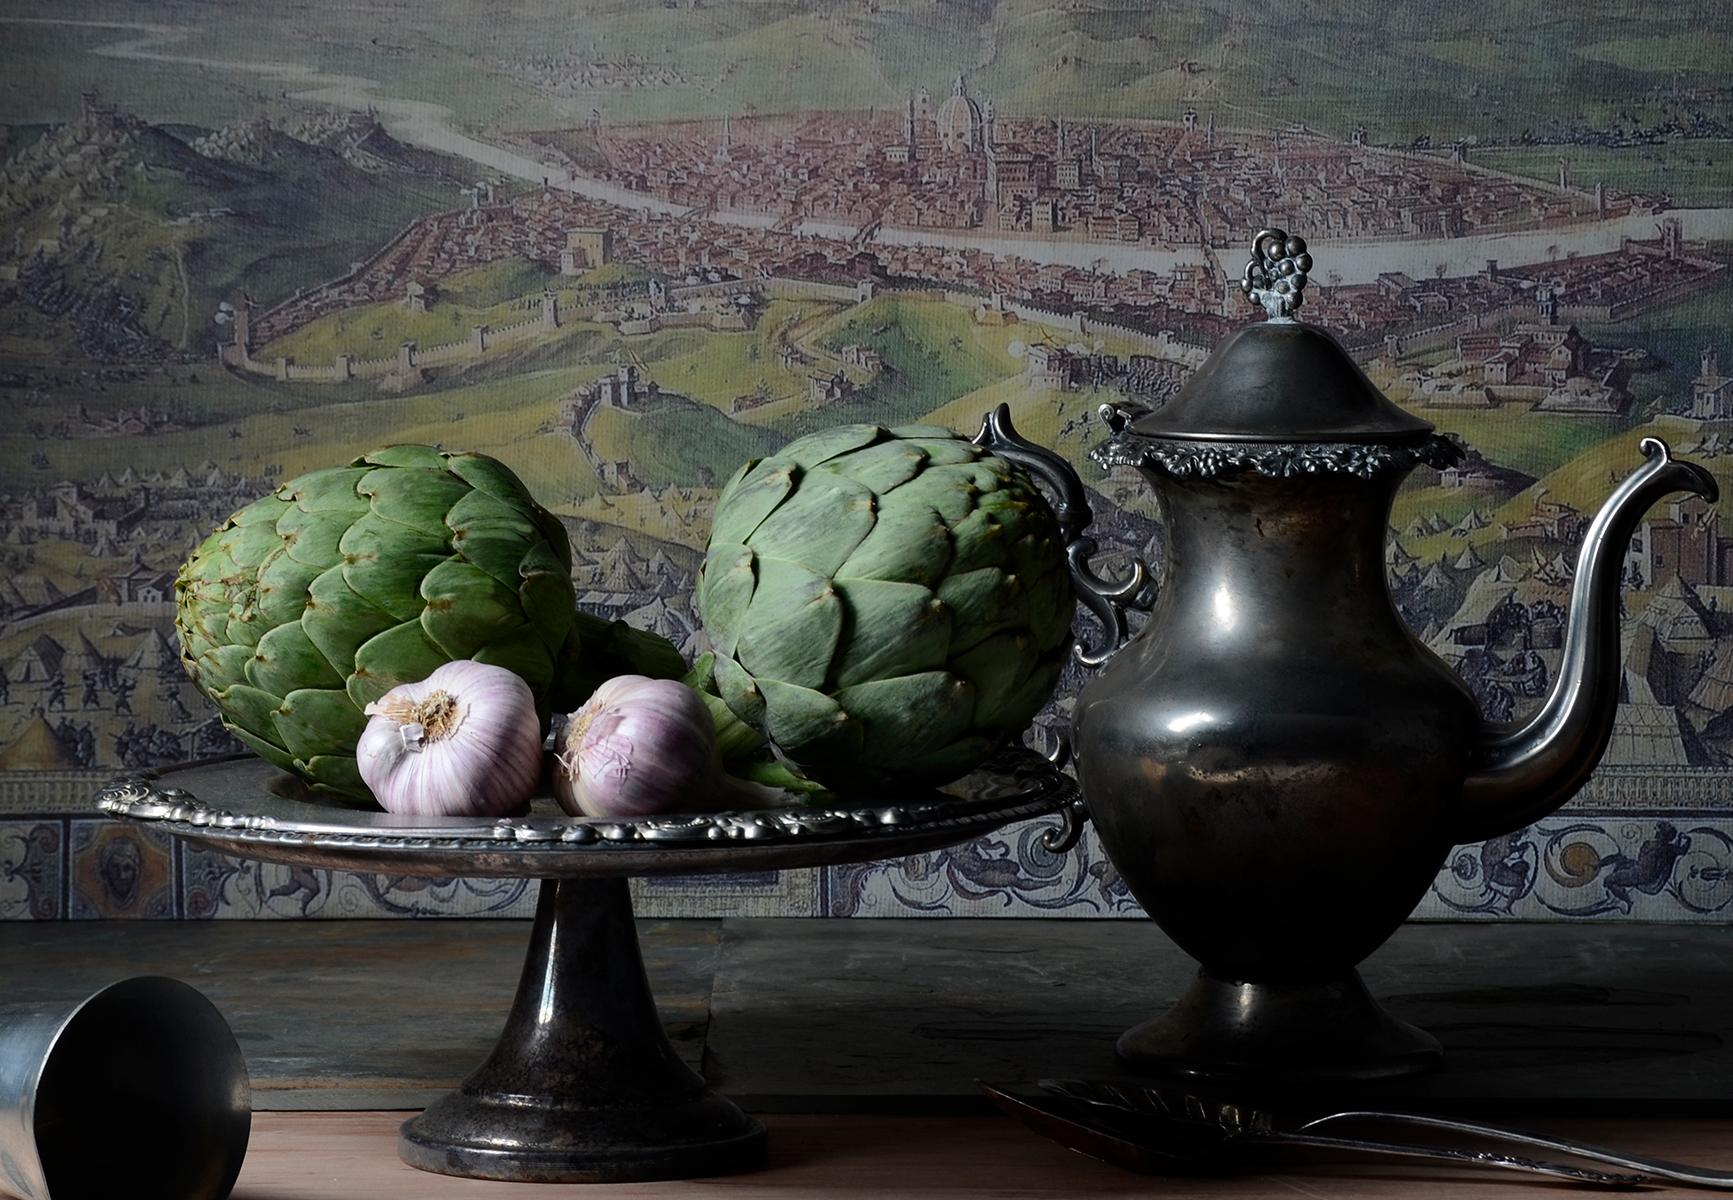 Dora Franco Still-Life Photograph - Alcachofas y ajos. From The Bodegones still life color photography  series